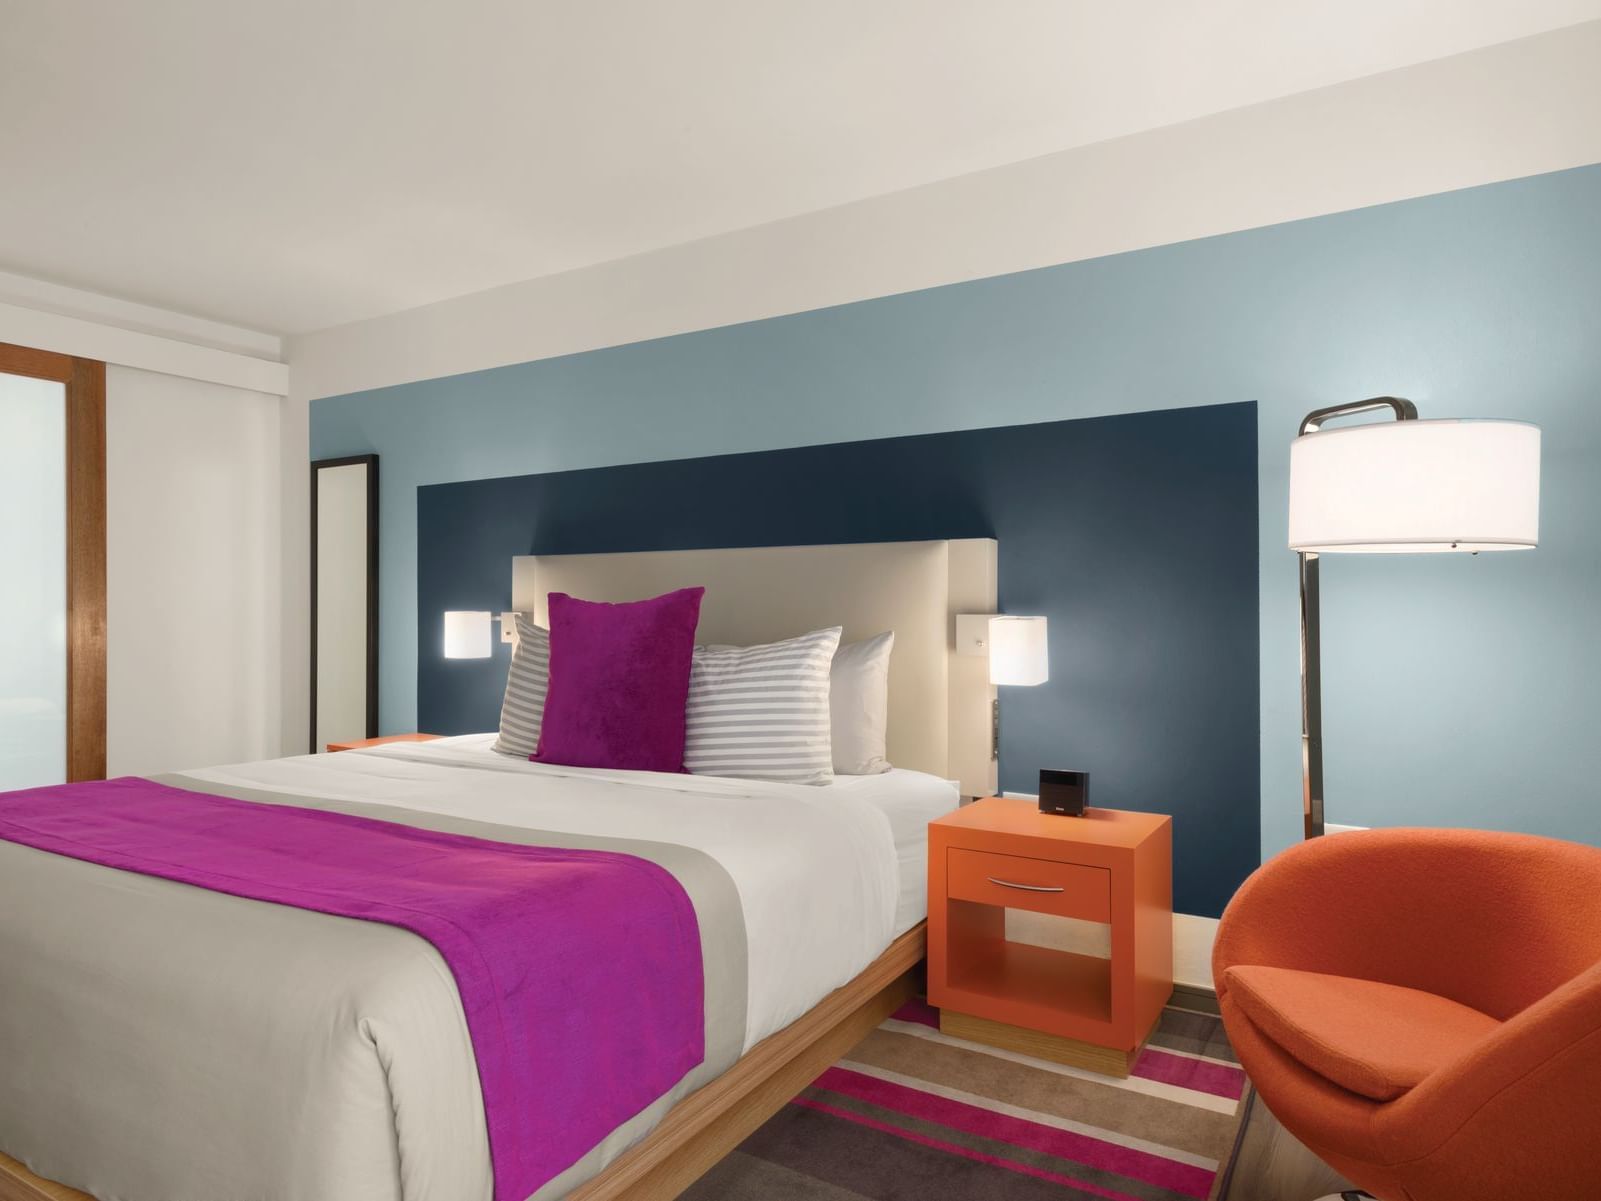 TRYP by Wyndham Isla Verde room with king bed, accent chair and lamp